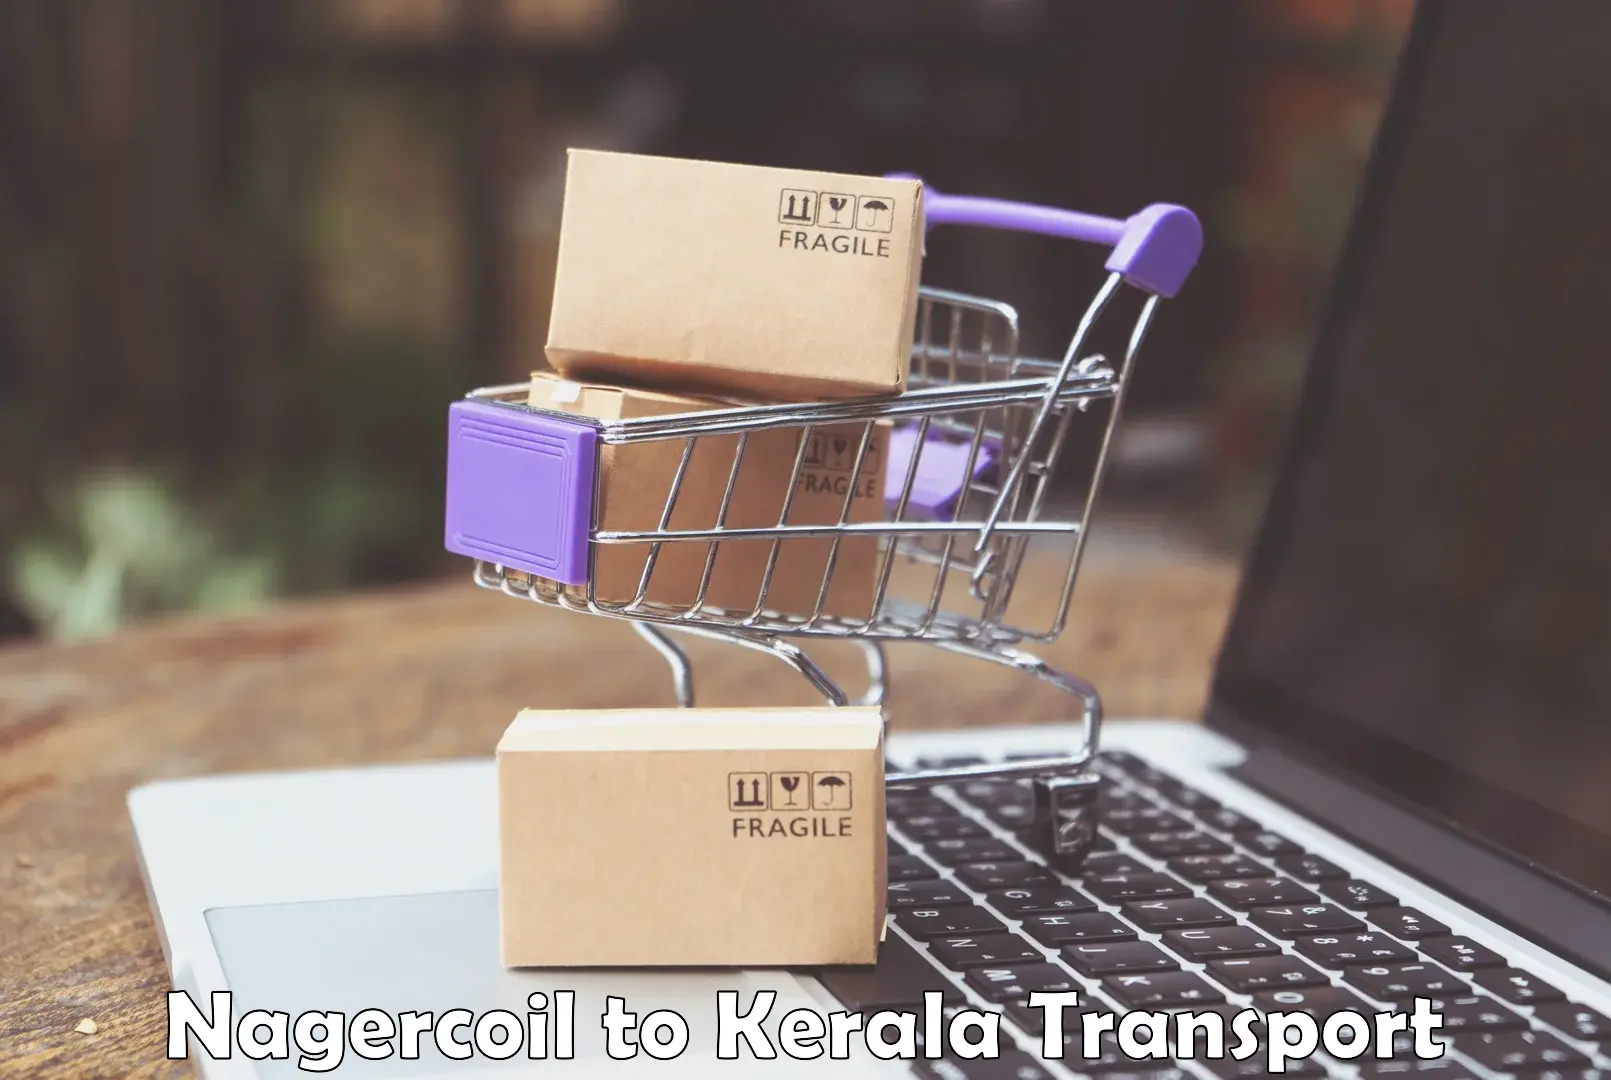 Delivery service Nagercoil to Kerala